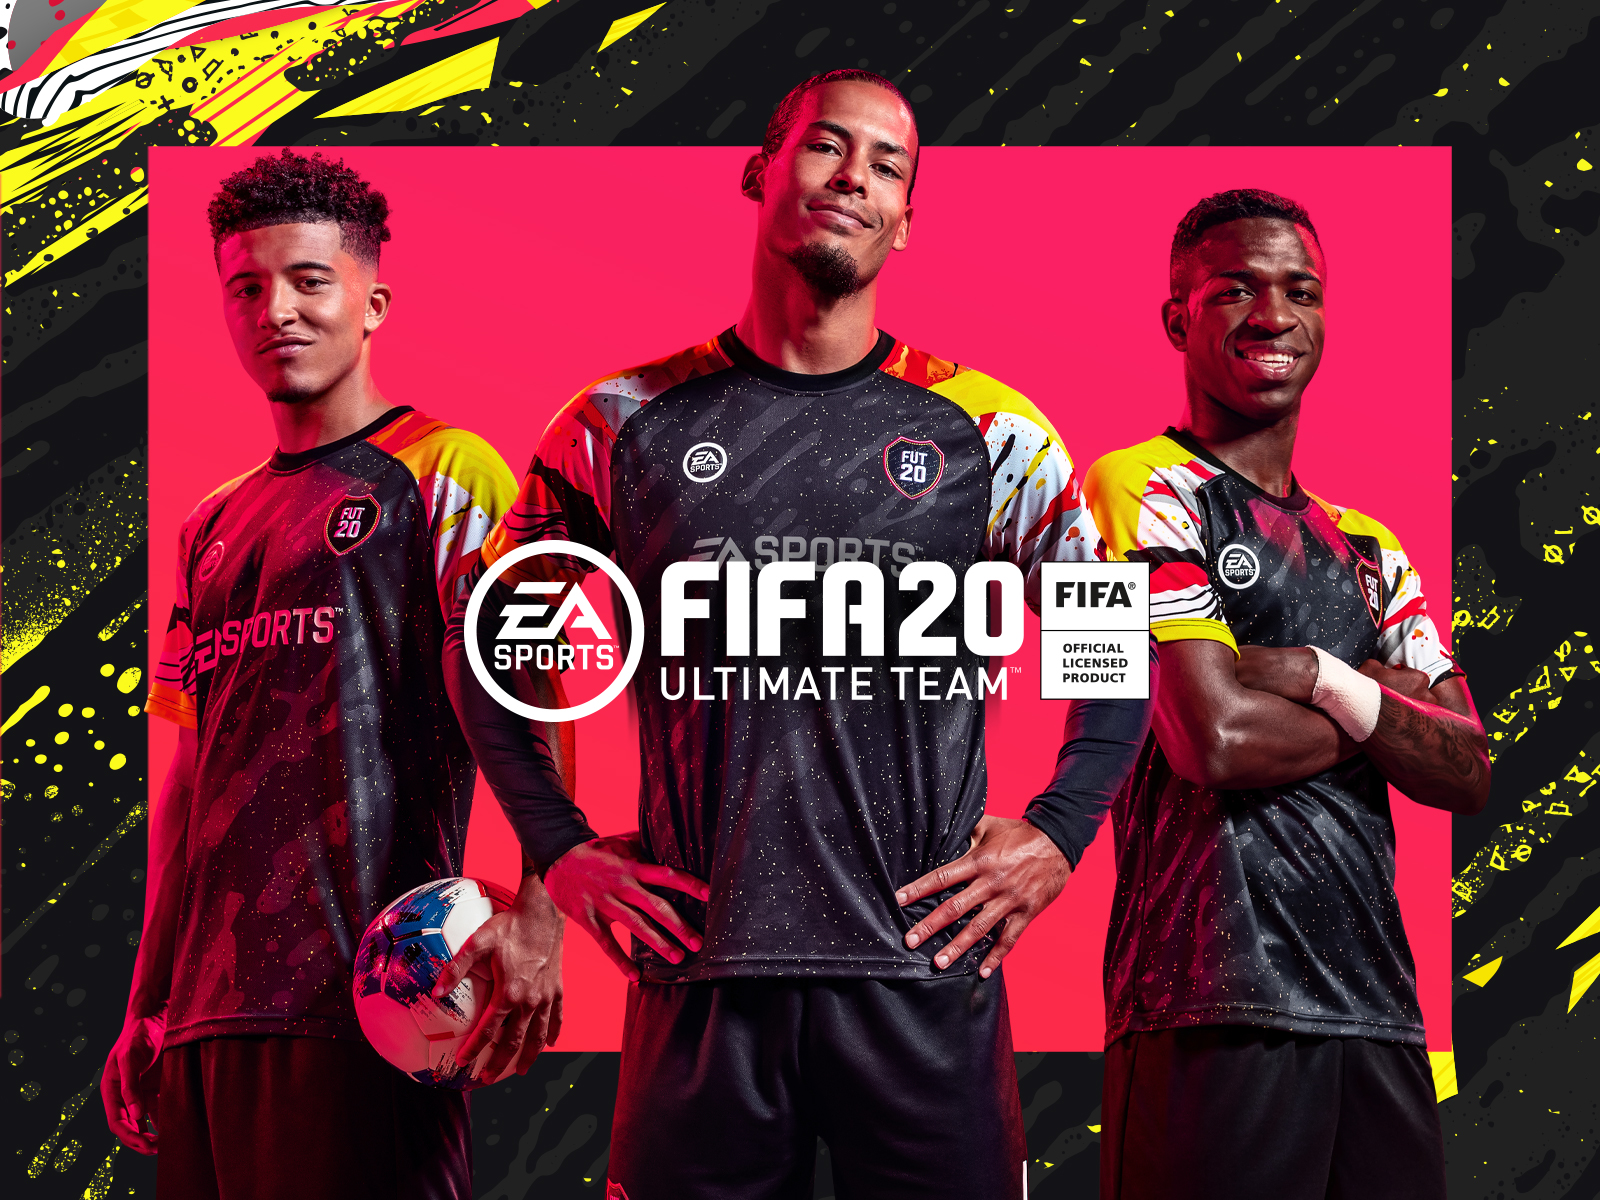 EA Sports FIFA Ultimate Team 2015 by Louise on Dribbble